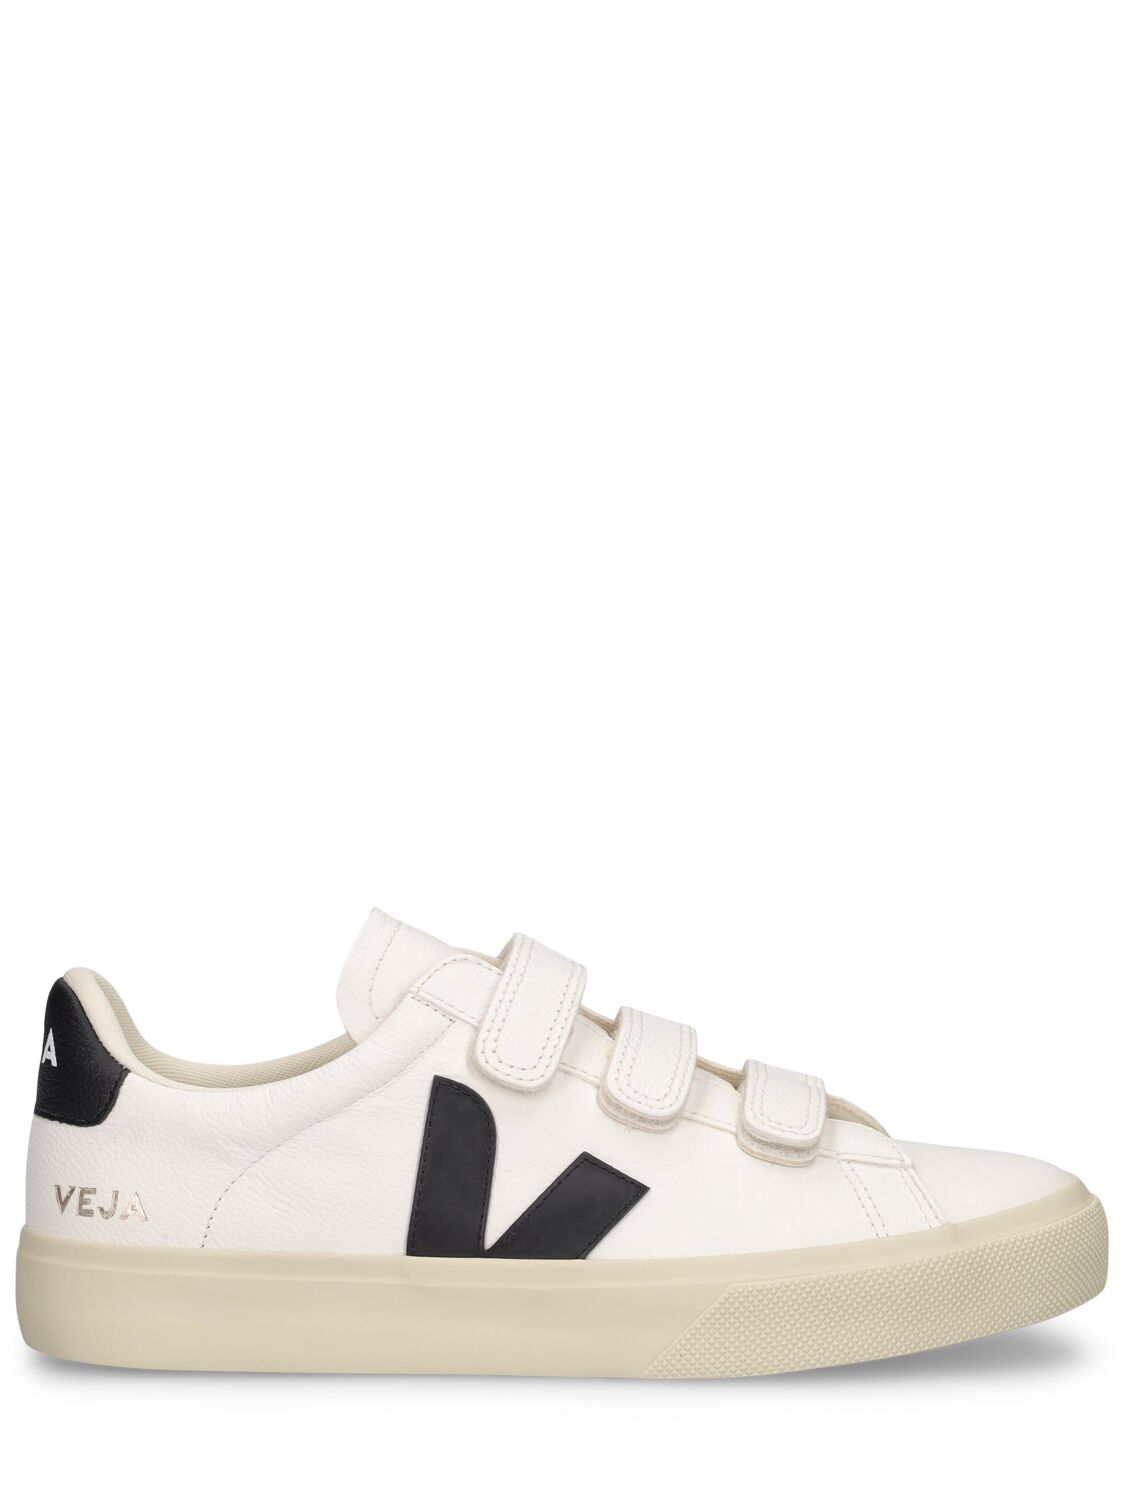 Veja Recife Leather Sneakers In White